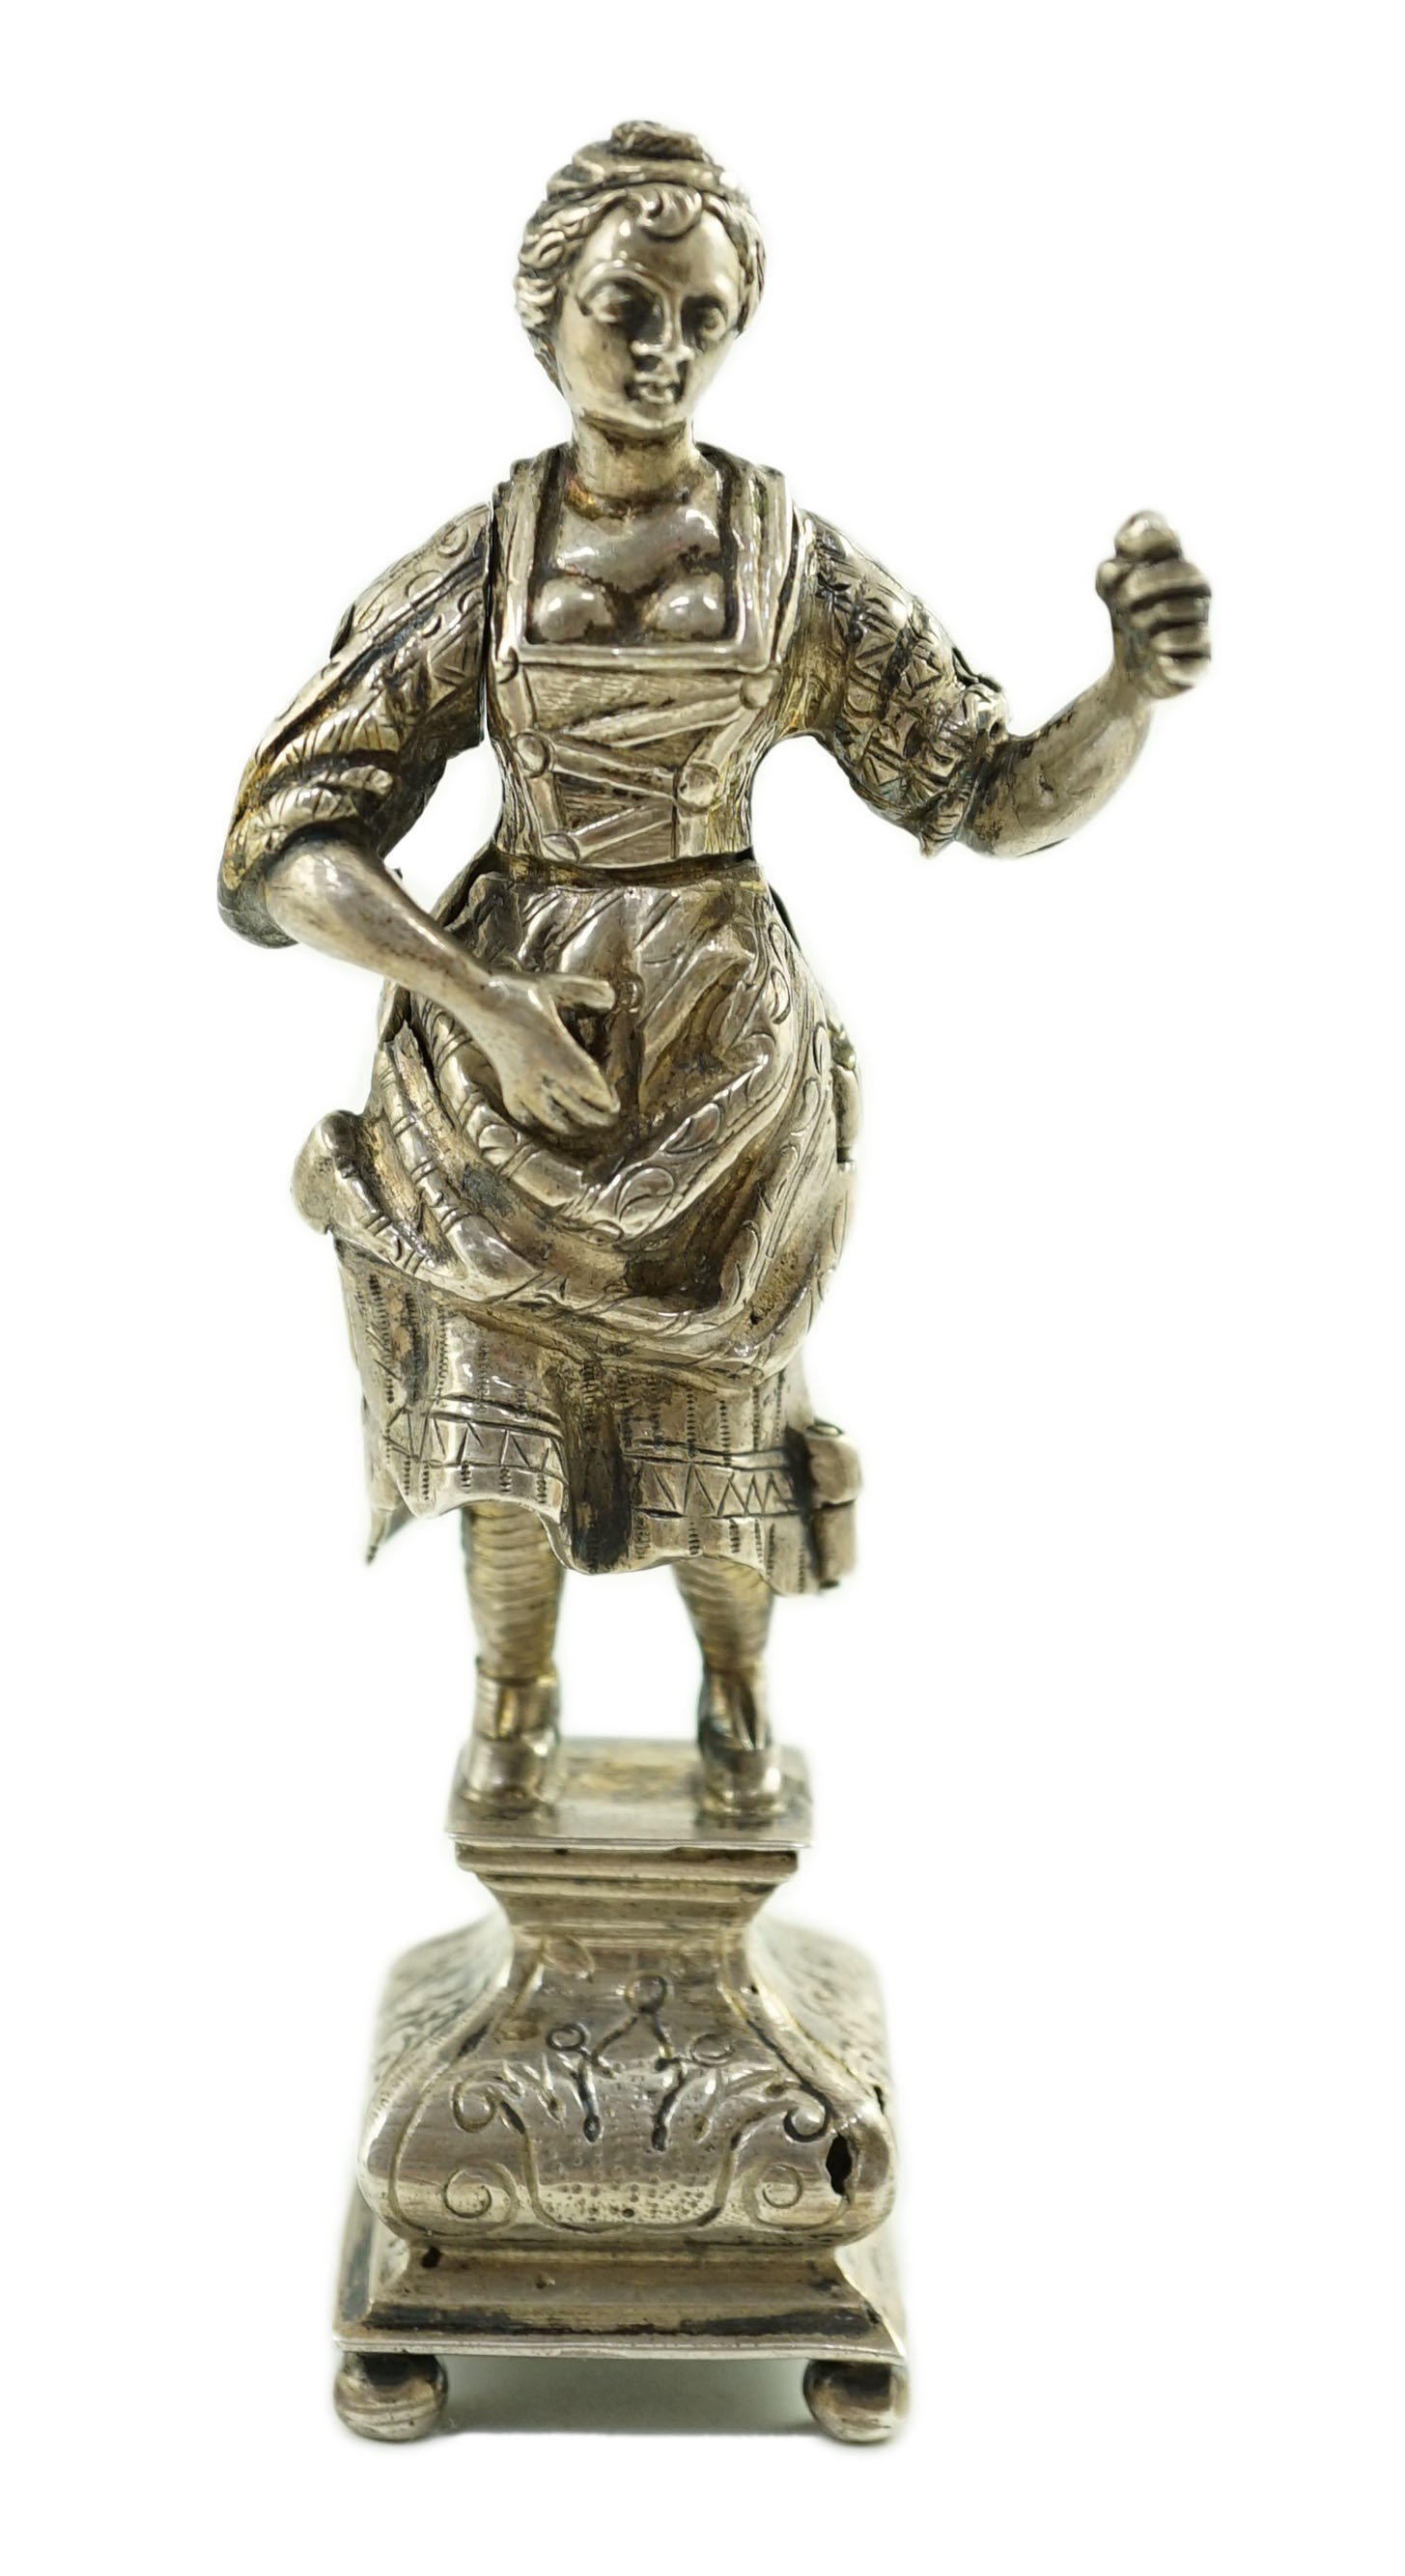 A late 19th century Dutch silver erotic miniature figure of a lady, on a square base with ball feet